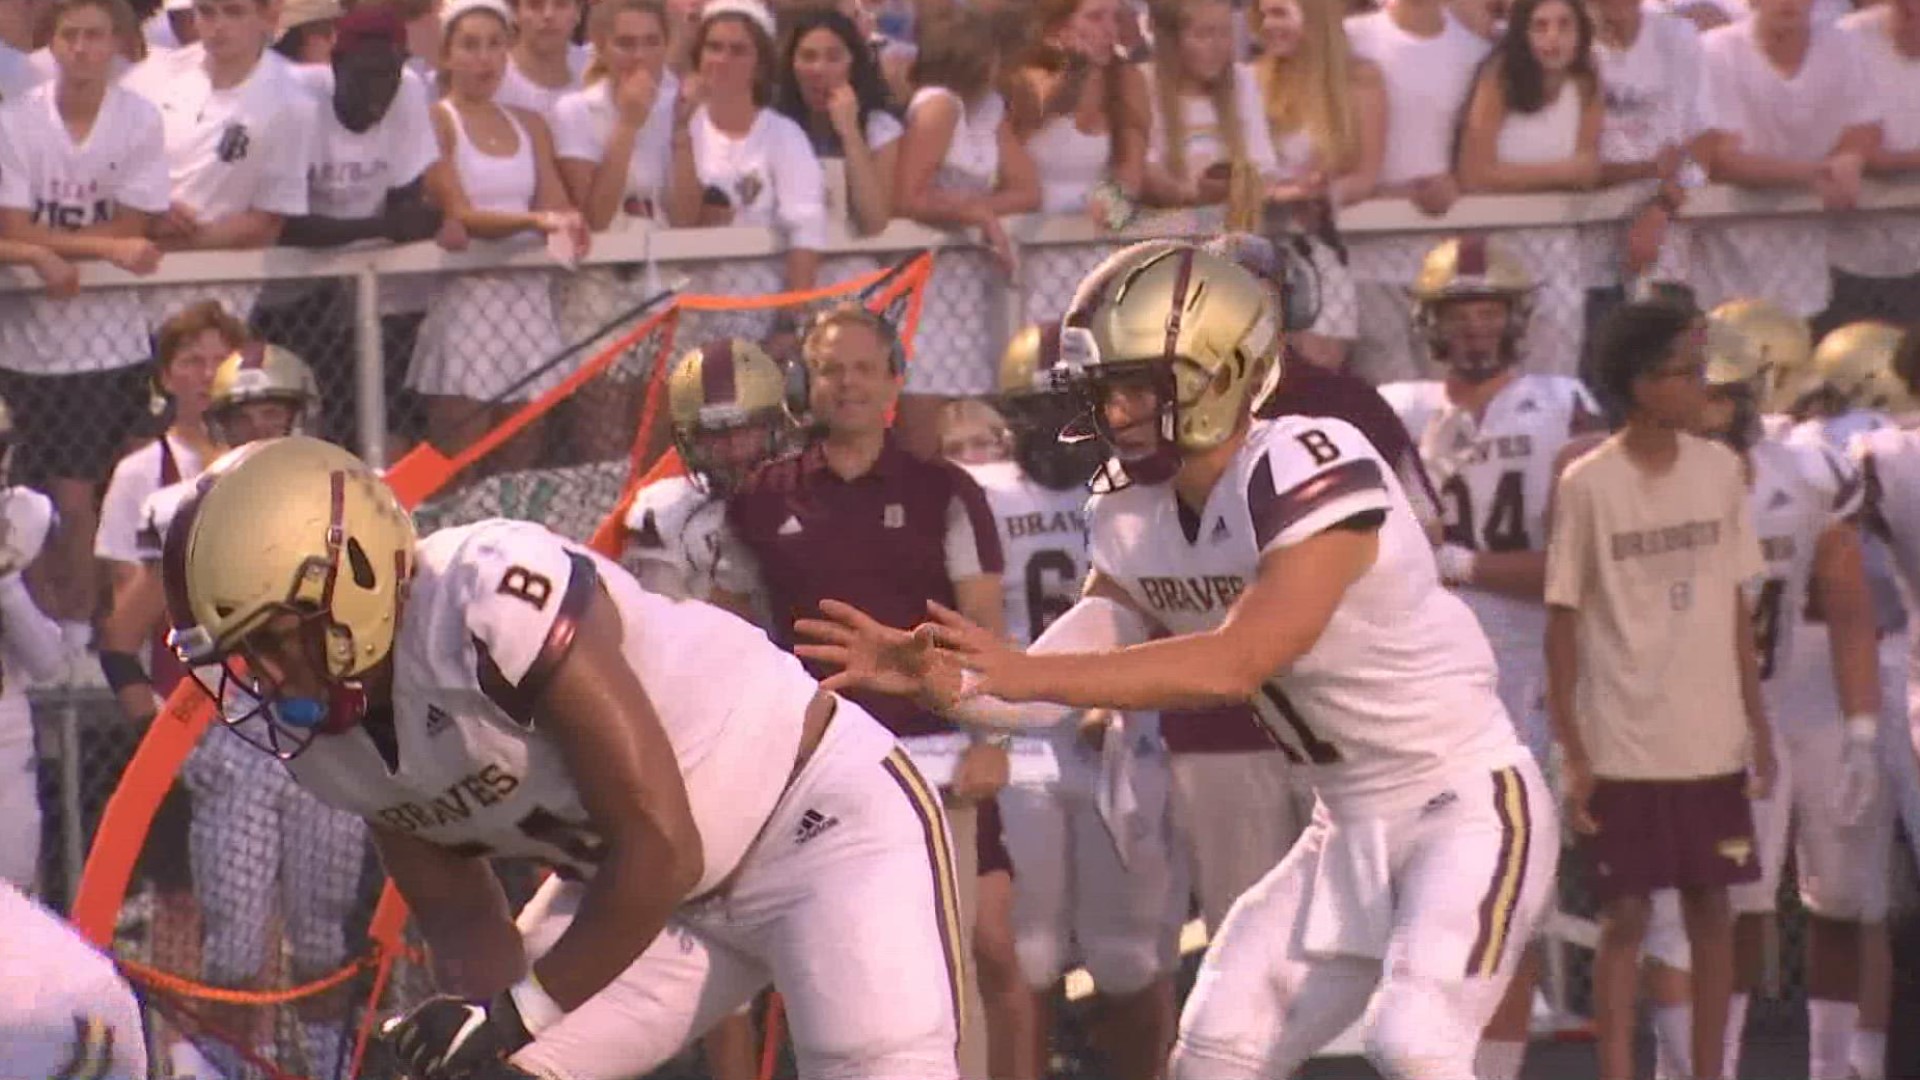 For the first time since 2013, Brebeuf gets a win over Chatard.